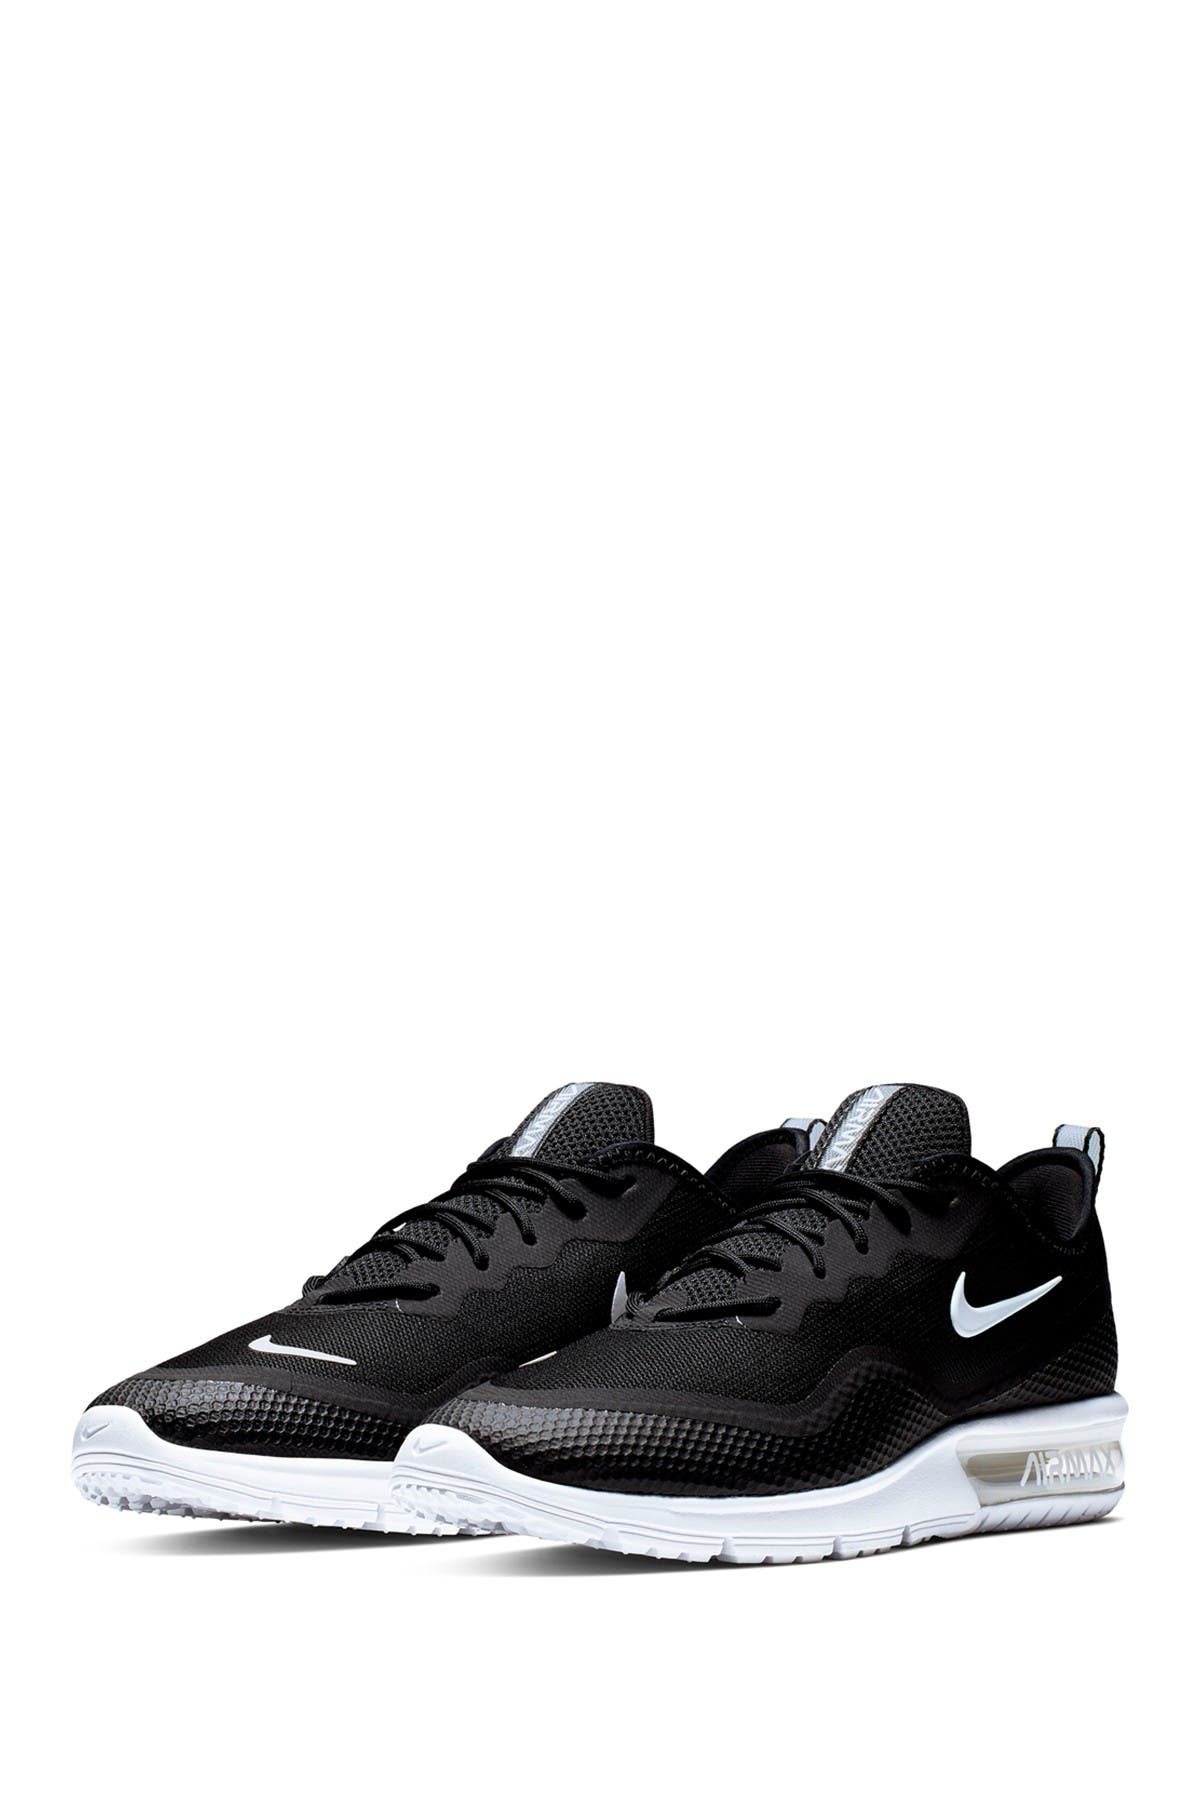 nike sequent 4.5 black